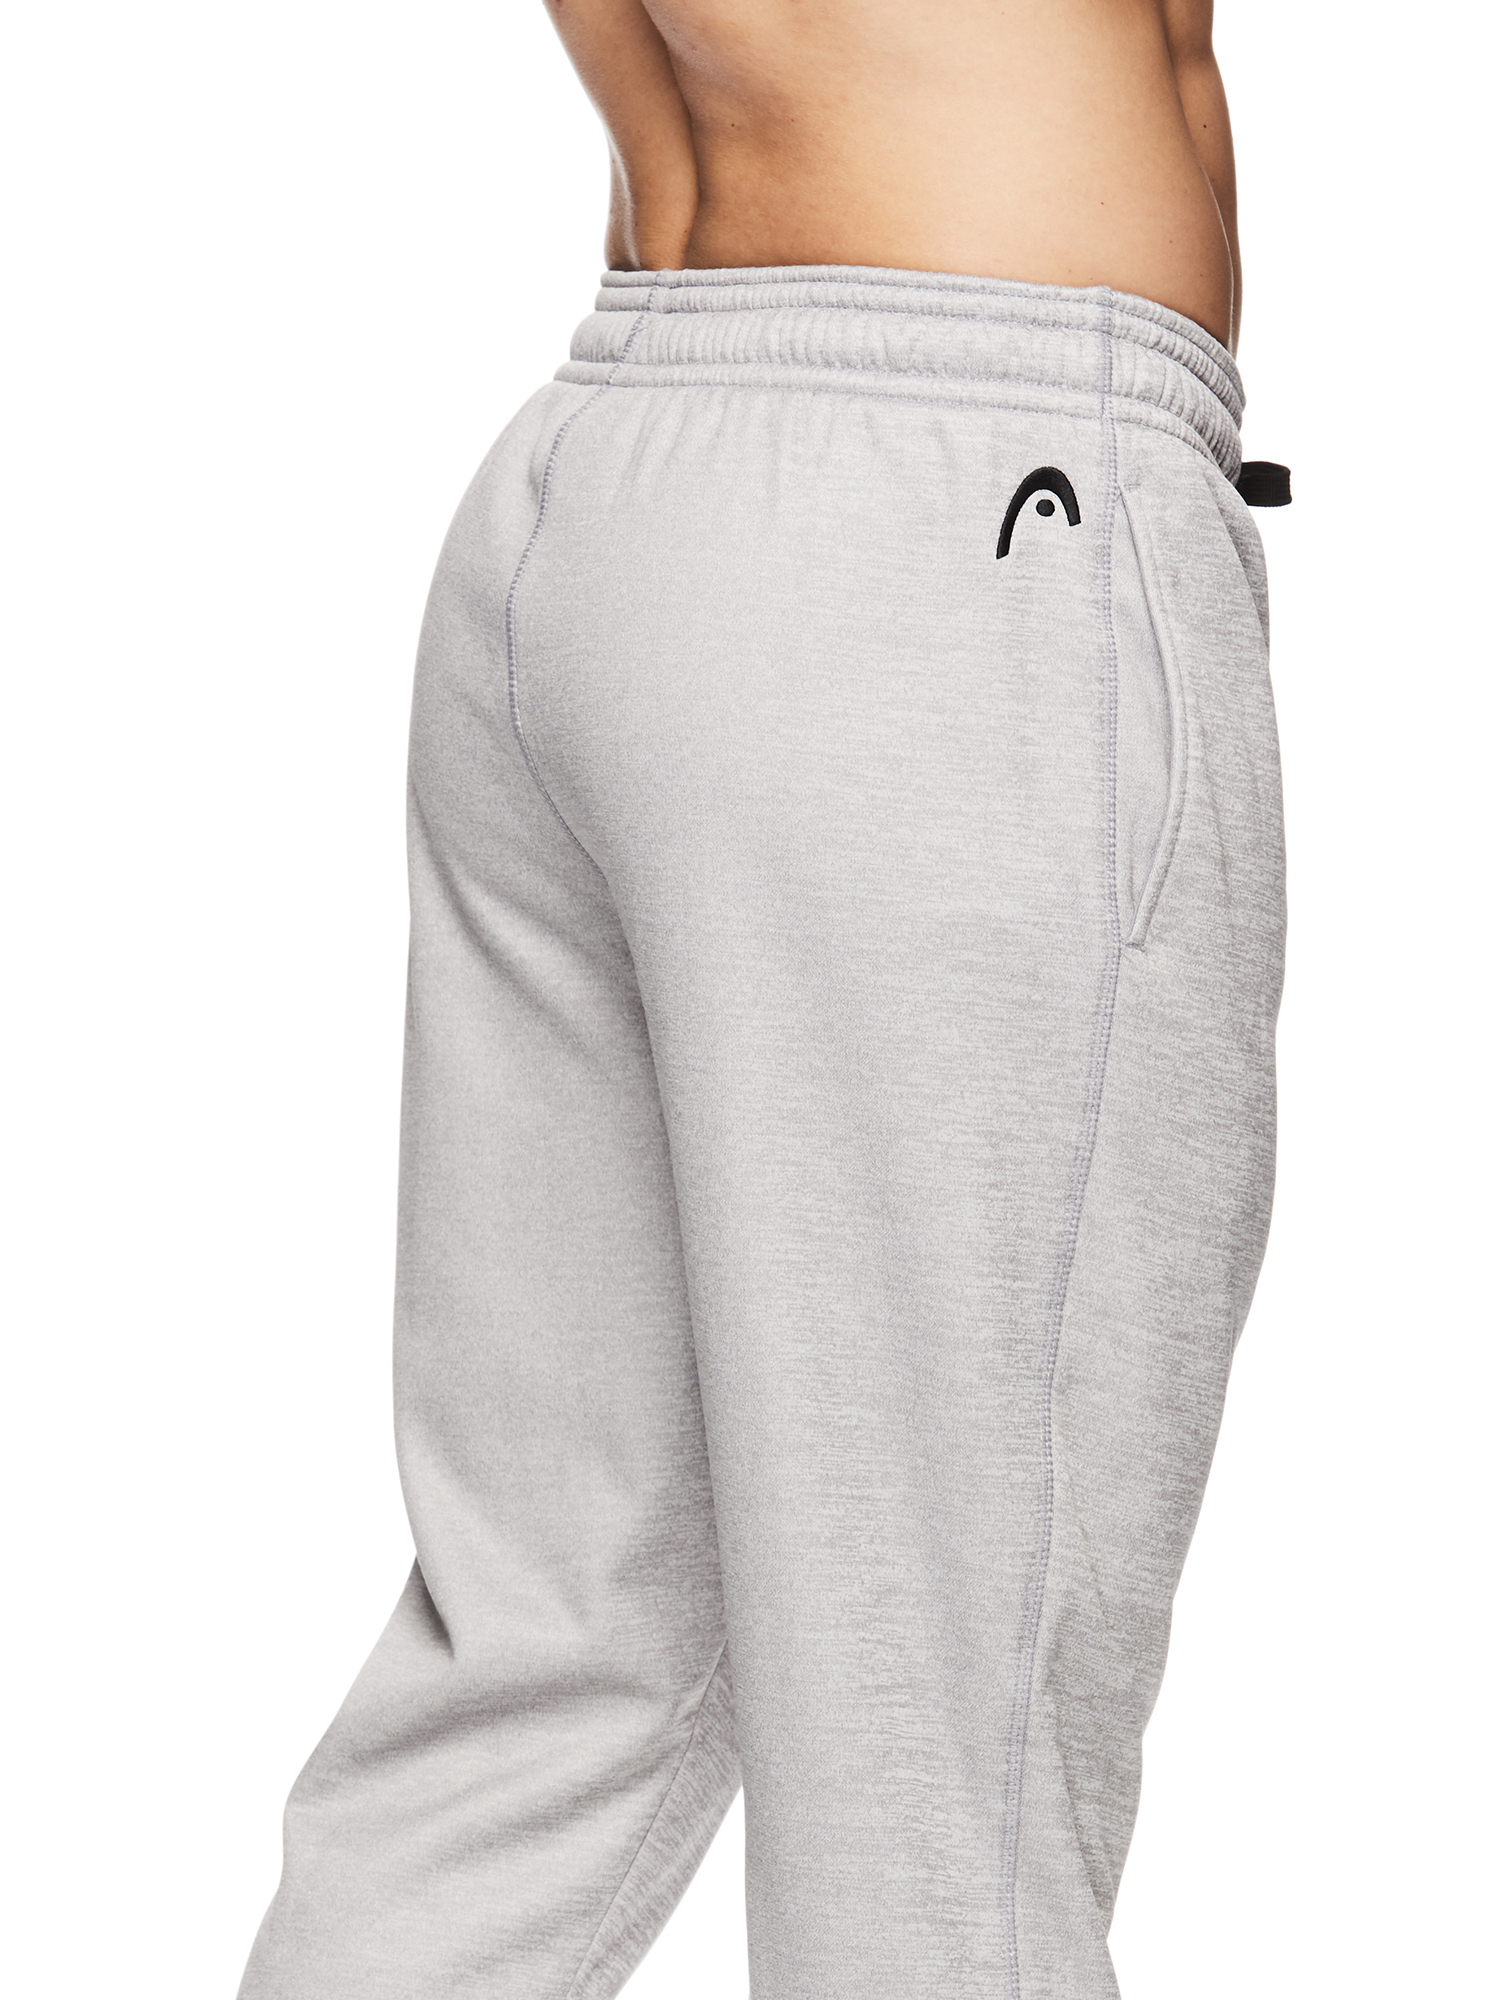 Head Men's Athletic Field Joggers - image 2 of 3